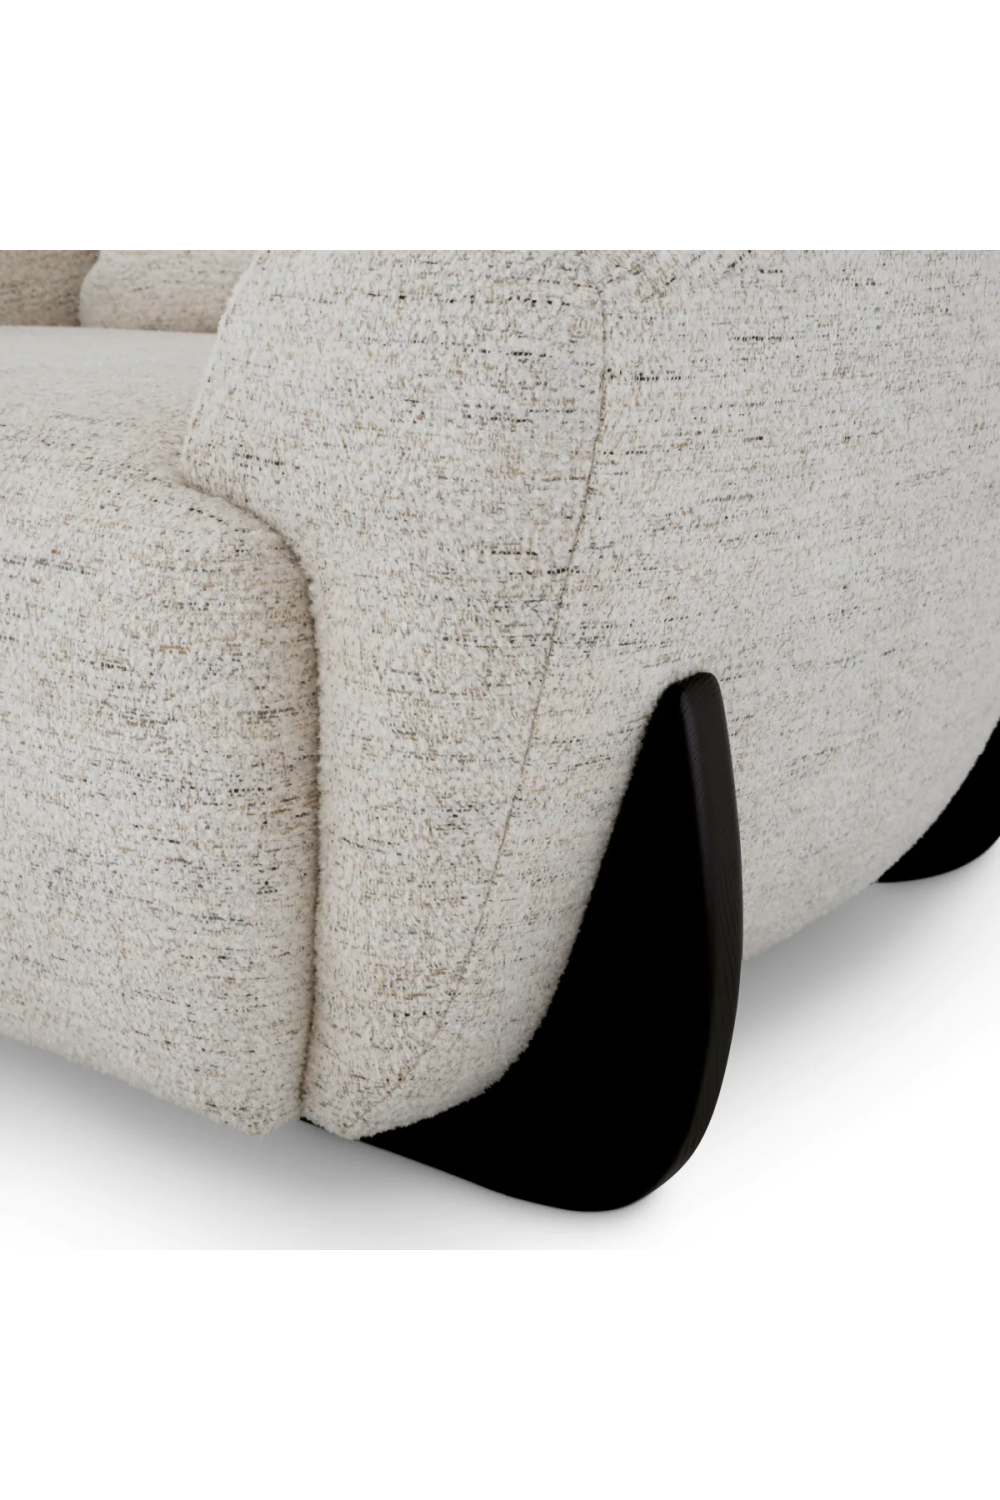 White Curved Lounge Chair | Eichholtz Siderno | Oroa.com